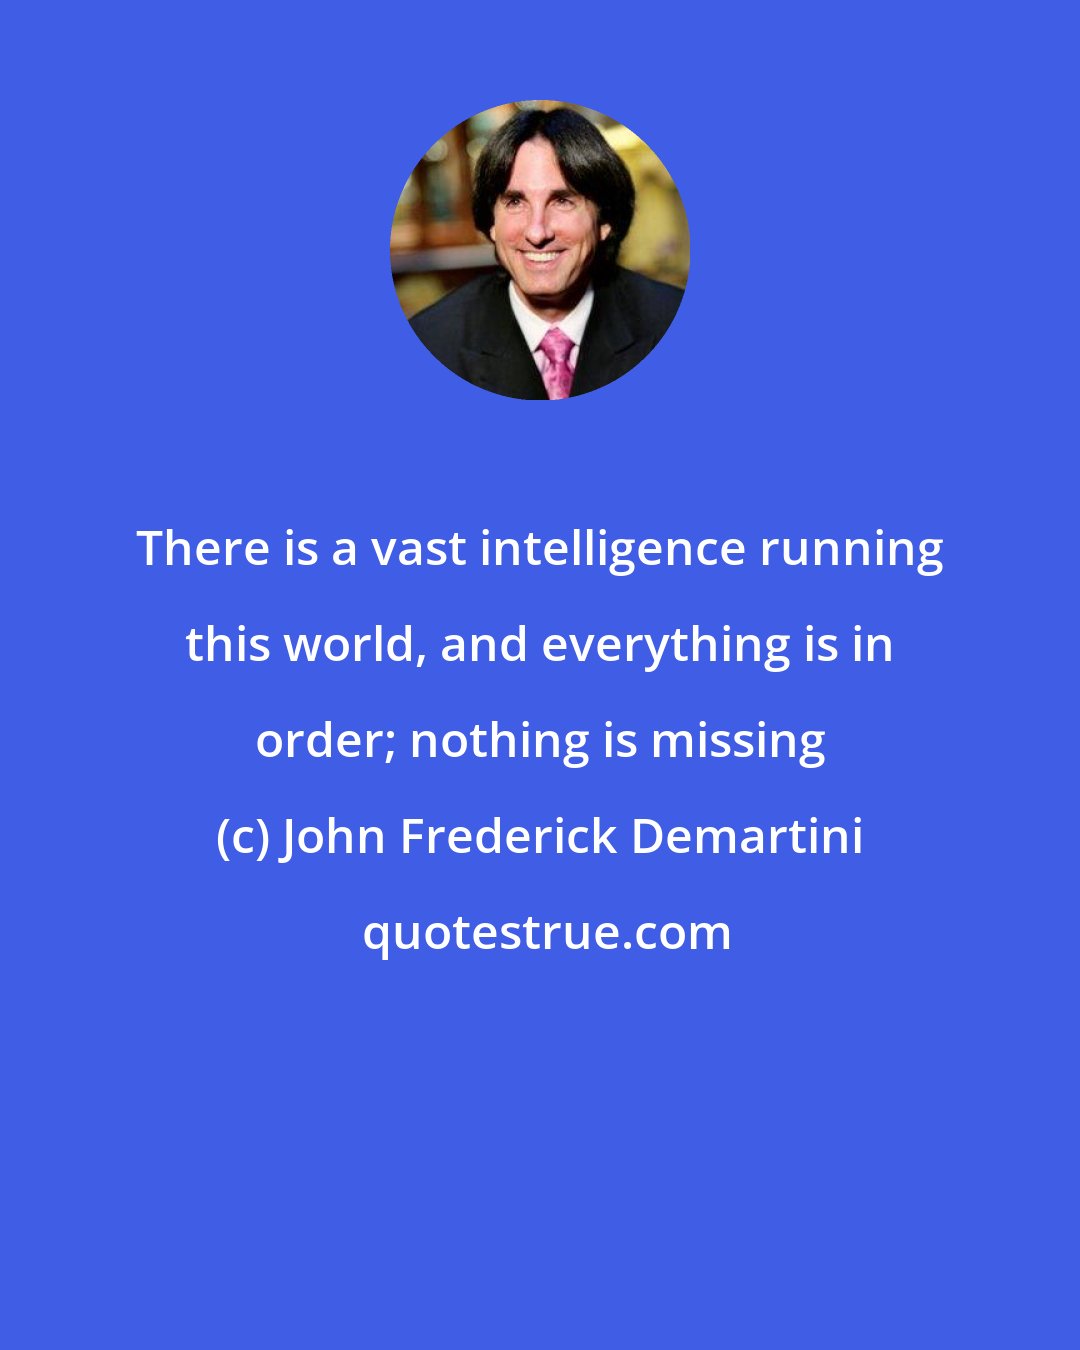 John Frederick Demartini: There is a vast intelligence running this world, and everything is in order; nothing is missing